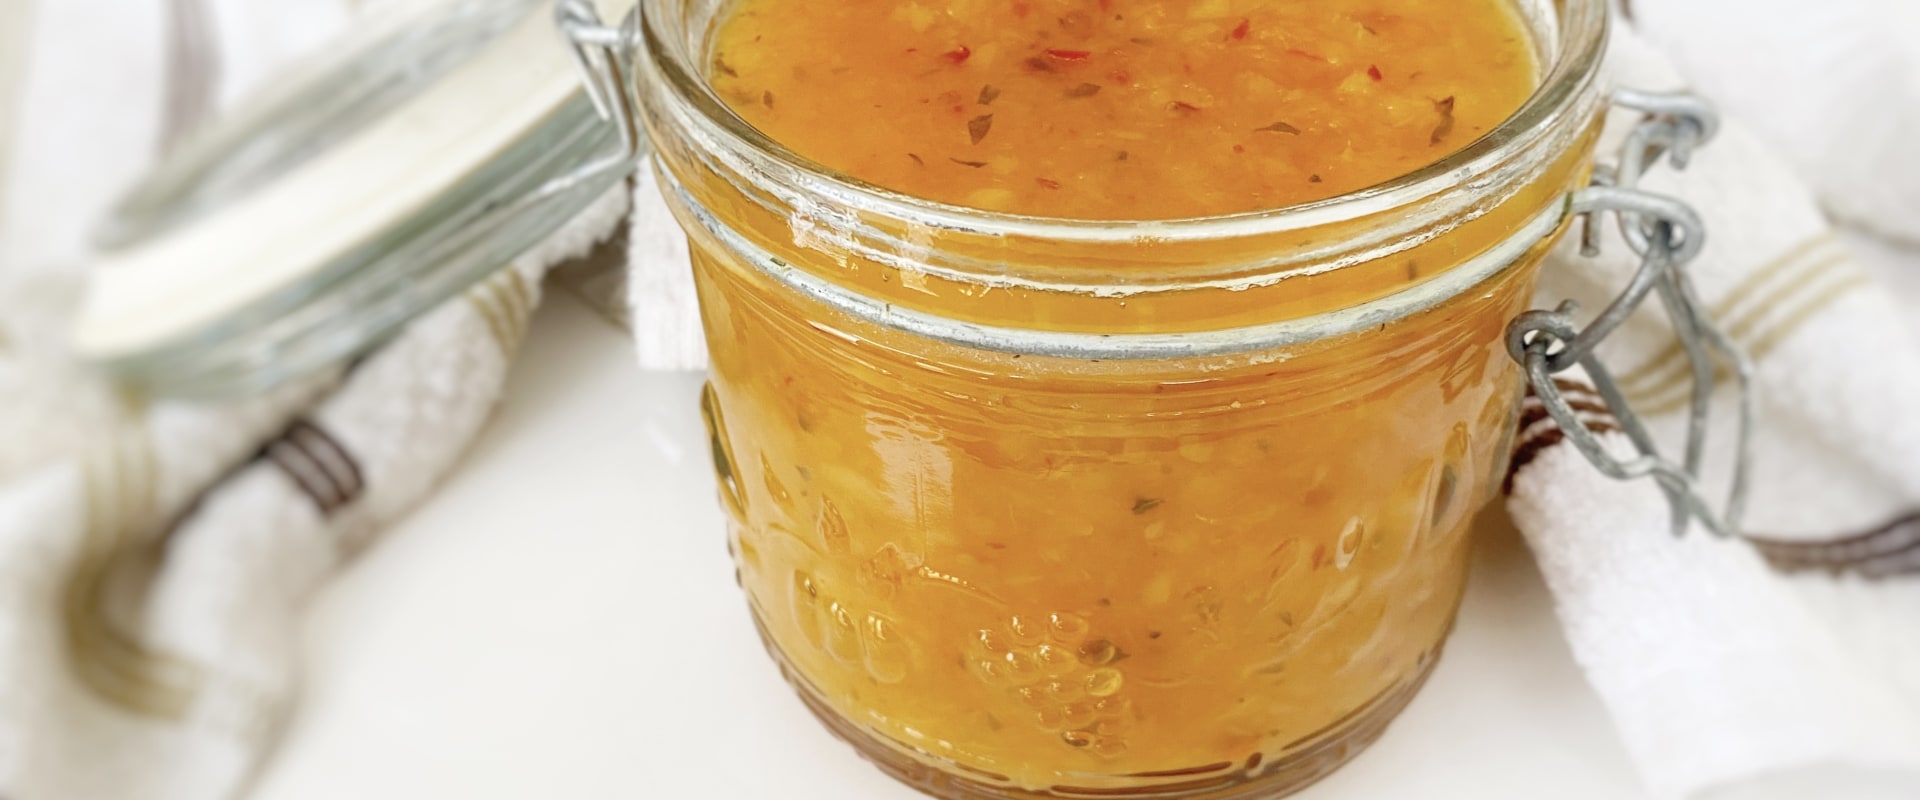 Pineapple Chilli Sauce Recipe: A Sweet and Spicy Treat